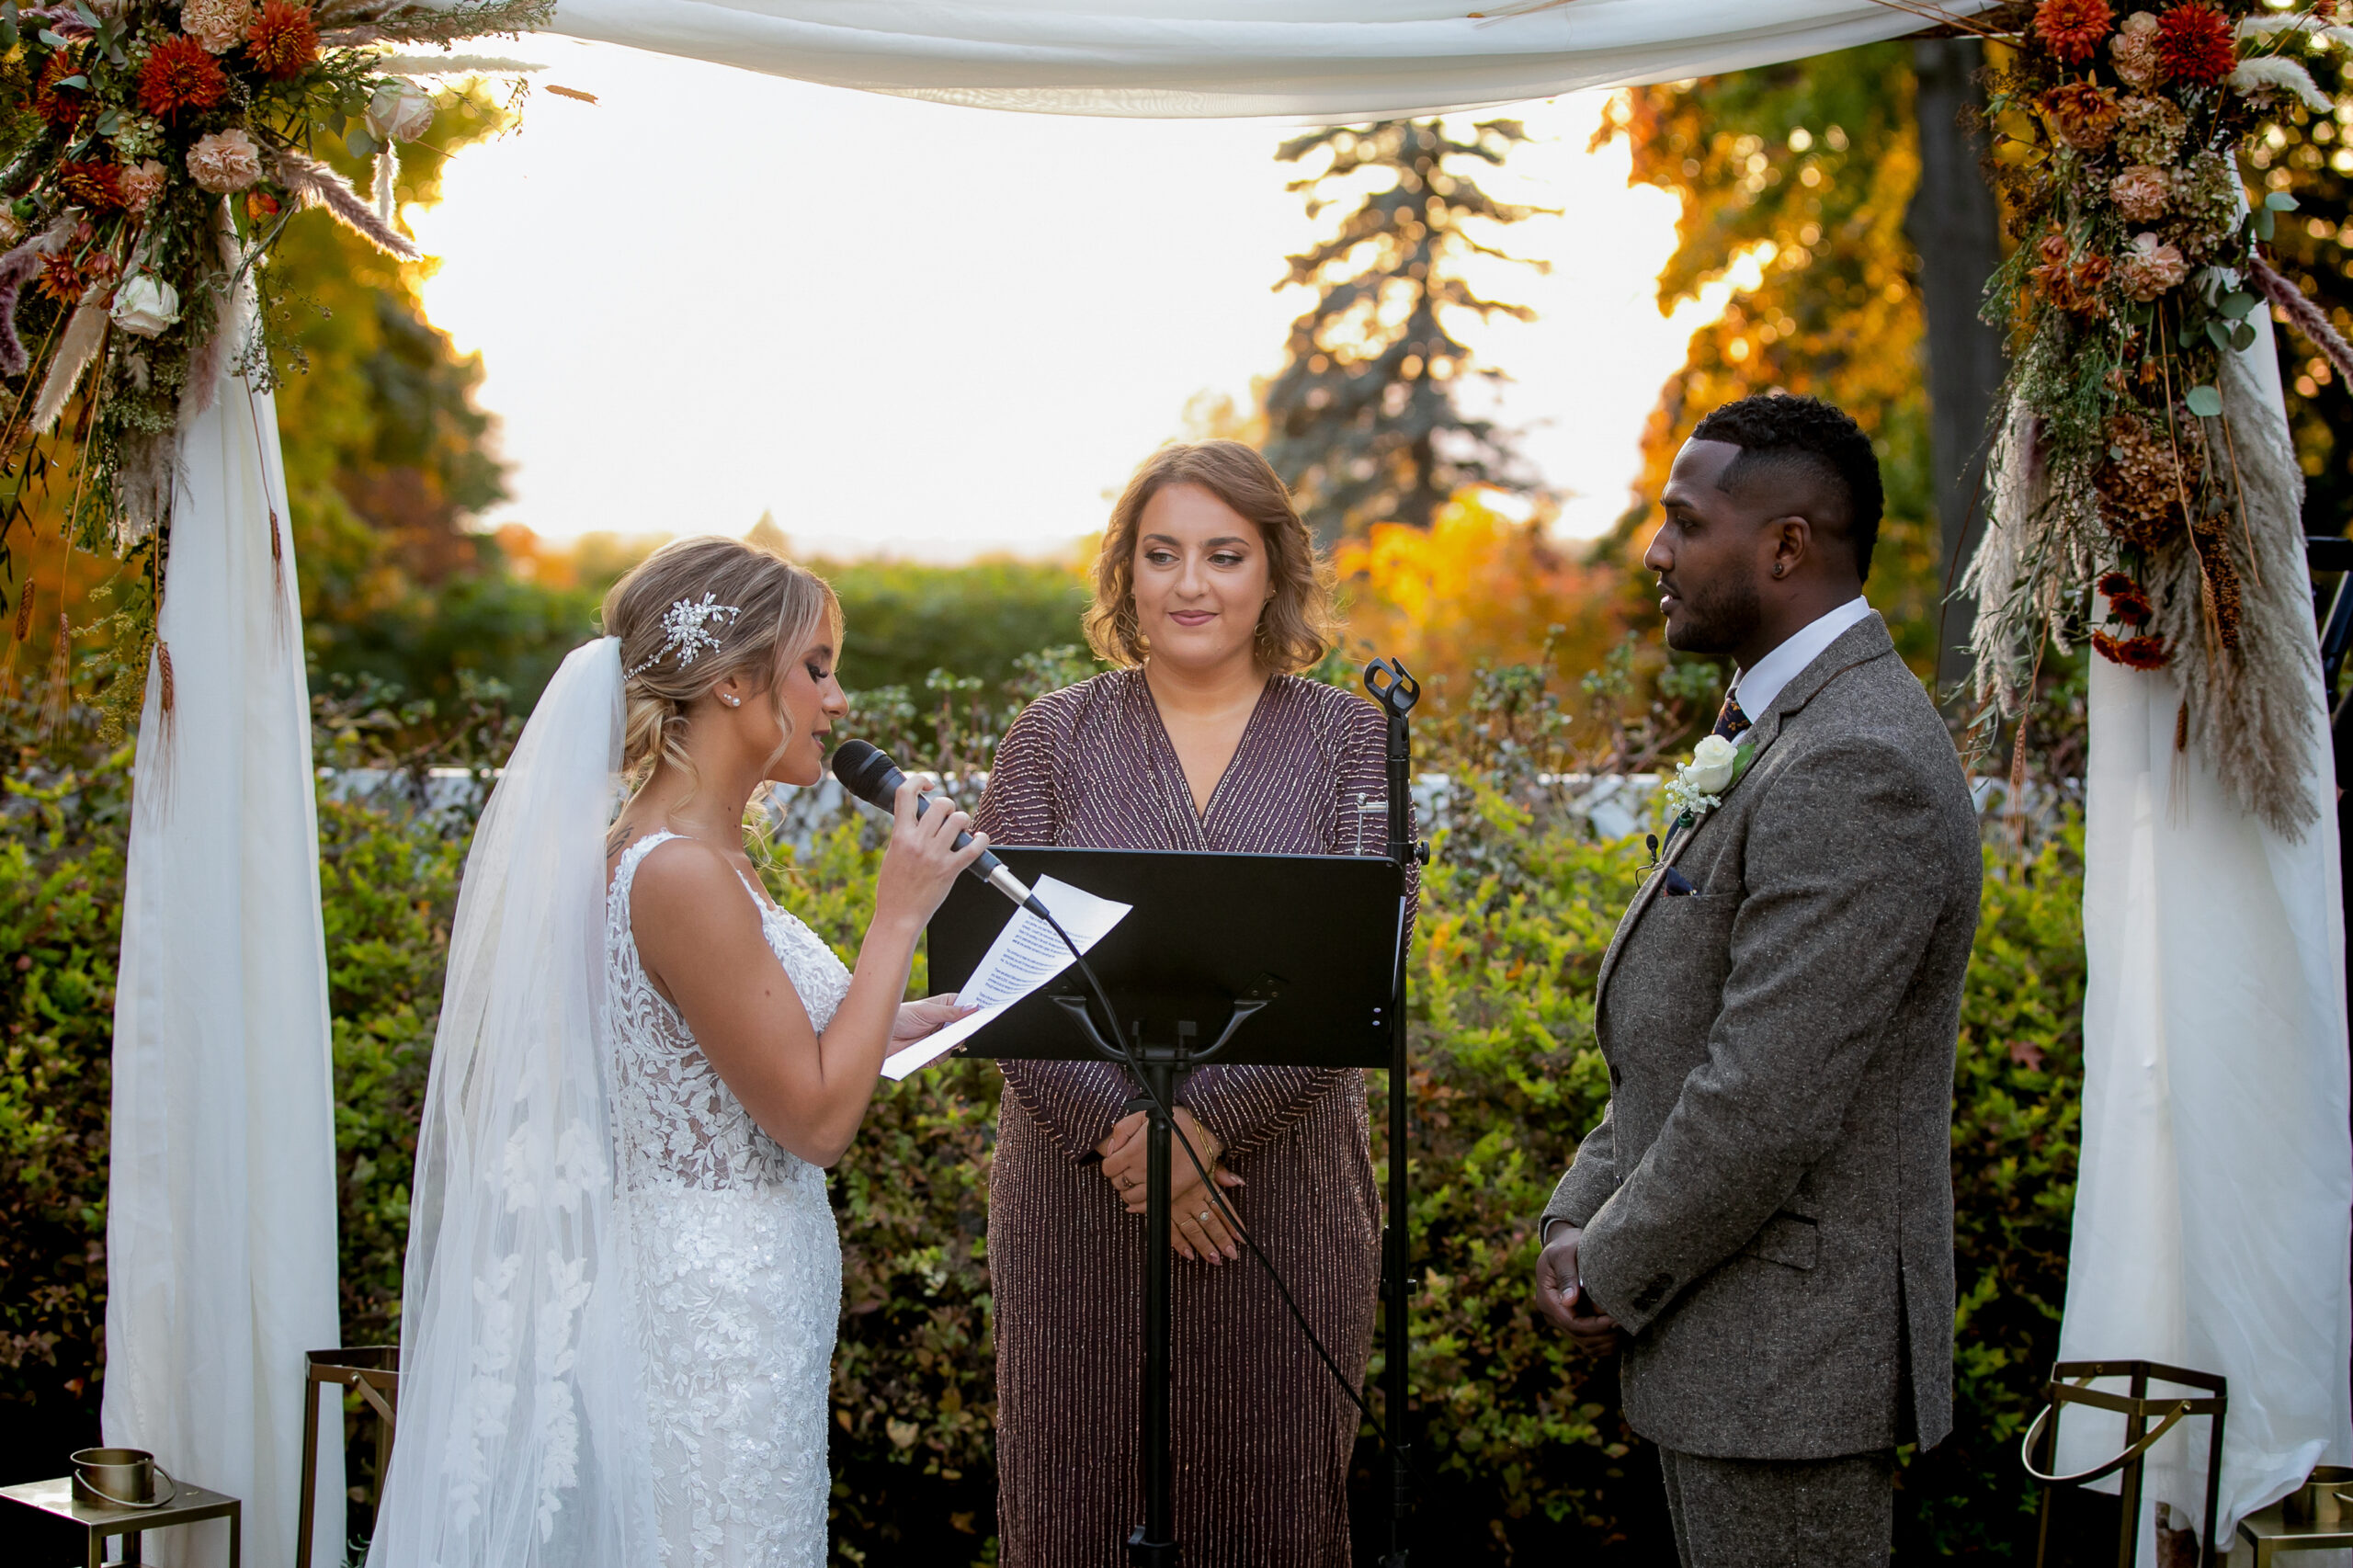 Outdoor ceremony at The Briarcliff Manor